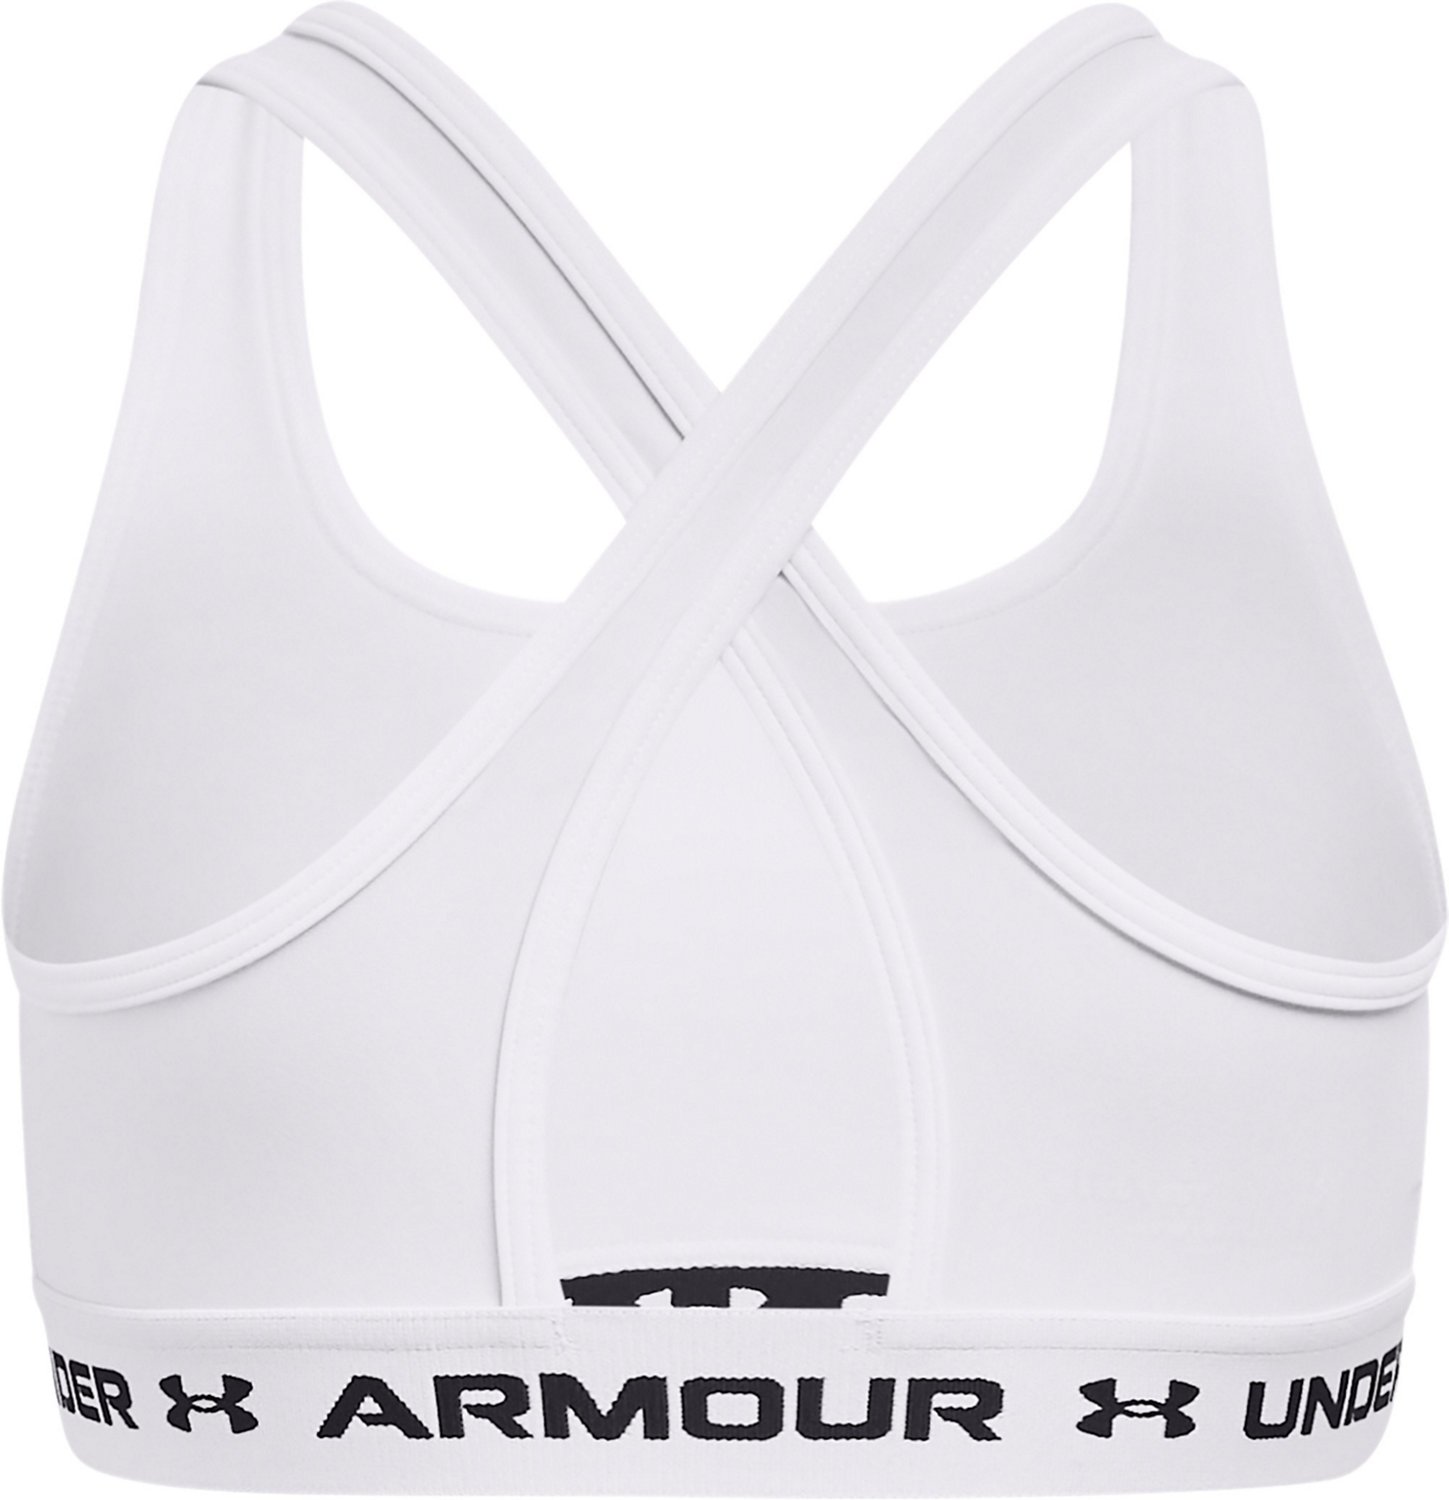 Under Armour Girls' Crossback Solid Mid Sports Bra